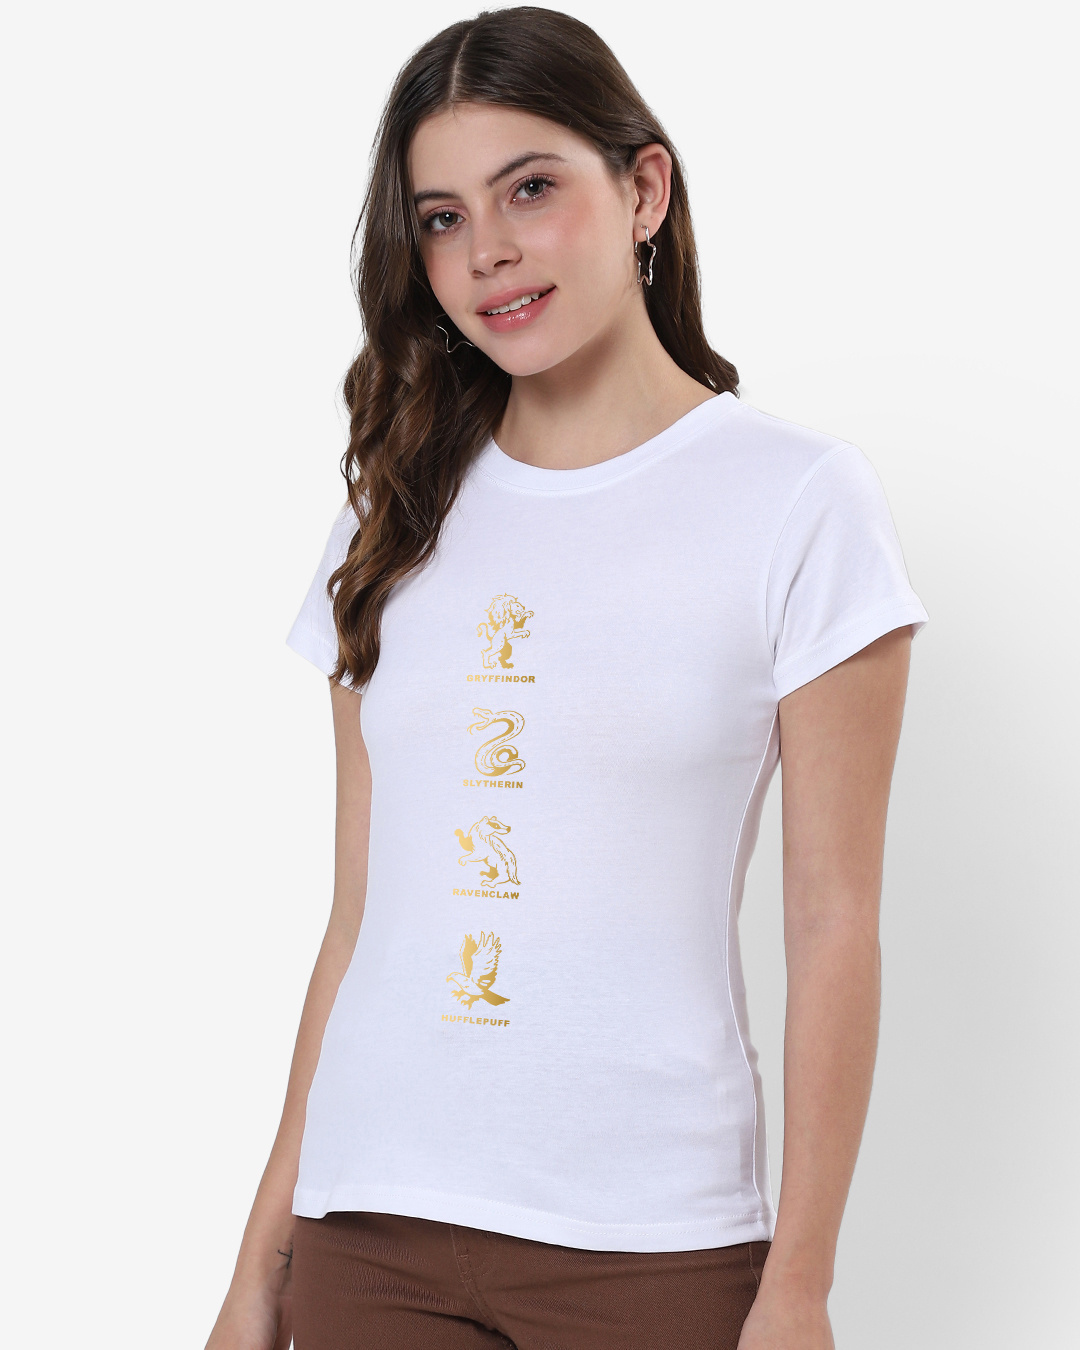 Shop Women's White House of Hogwarts Graphic Printed T-shirt-Back